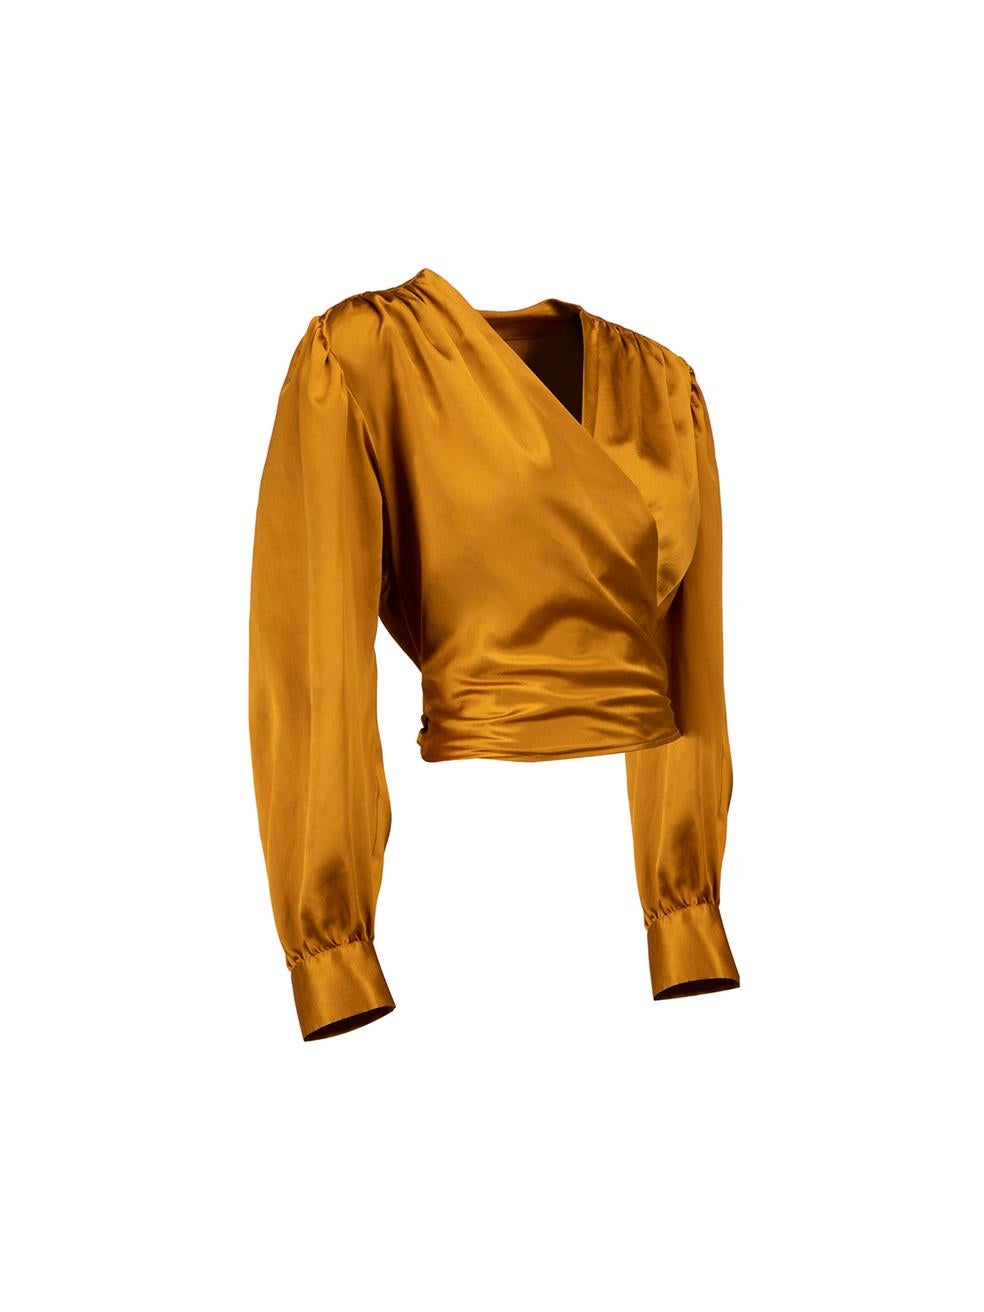 CONDITION is Good. Minor wear to blouse is evident. Light wear to the front, both sleeves and back with discoloured marks. There are also pulls to the weave at the neckline and the left-shoulder on this used Yves Saint Laurent designer resale item.